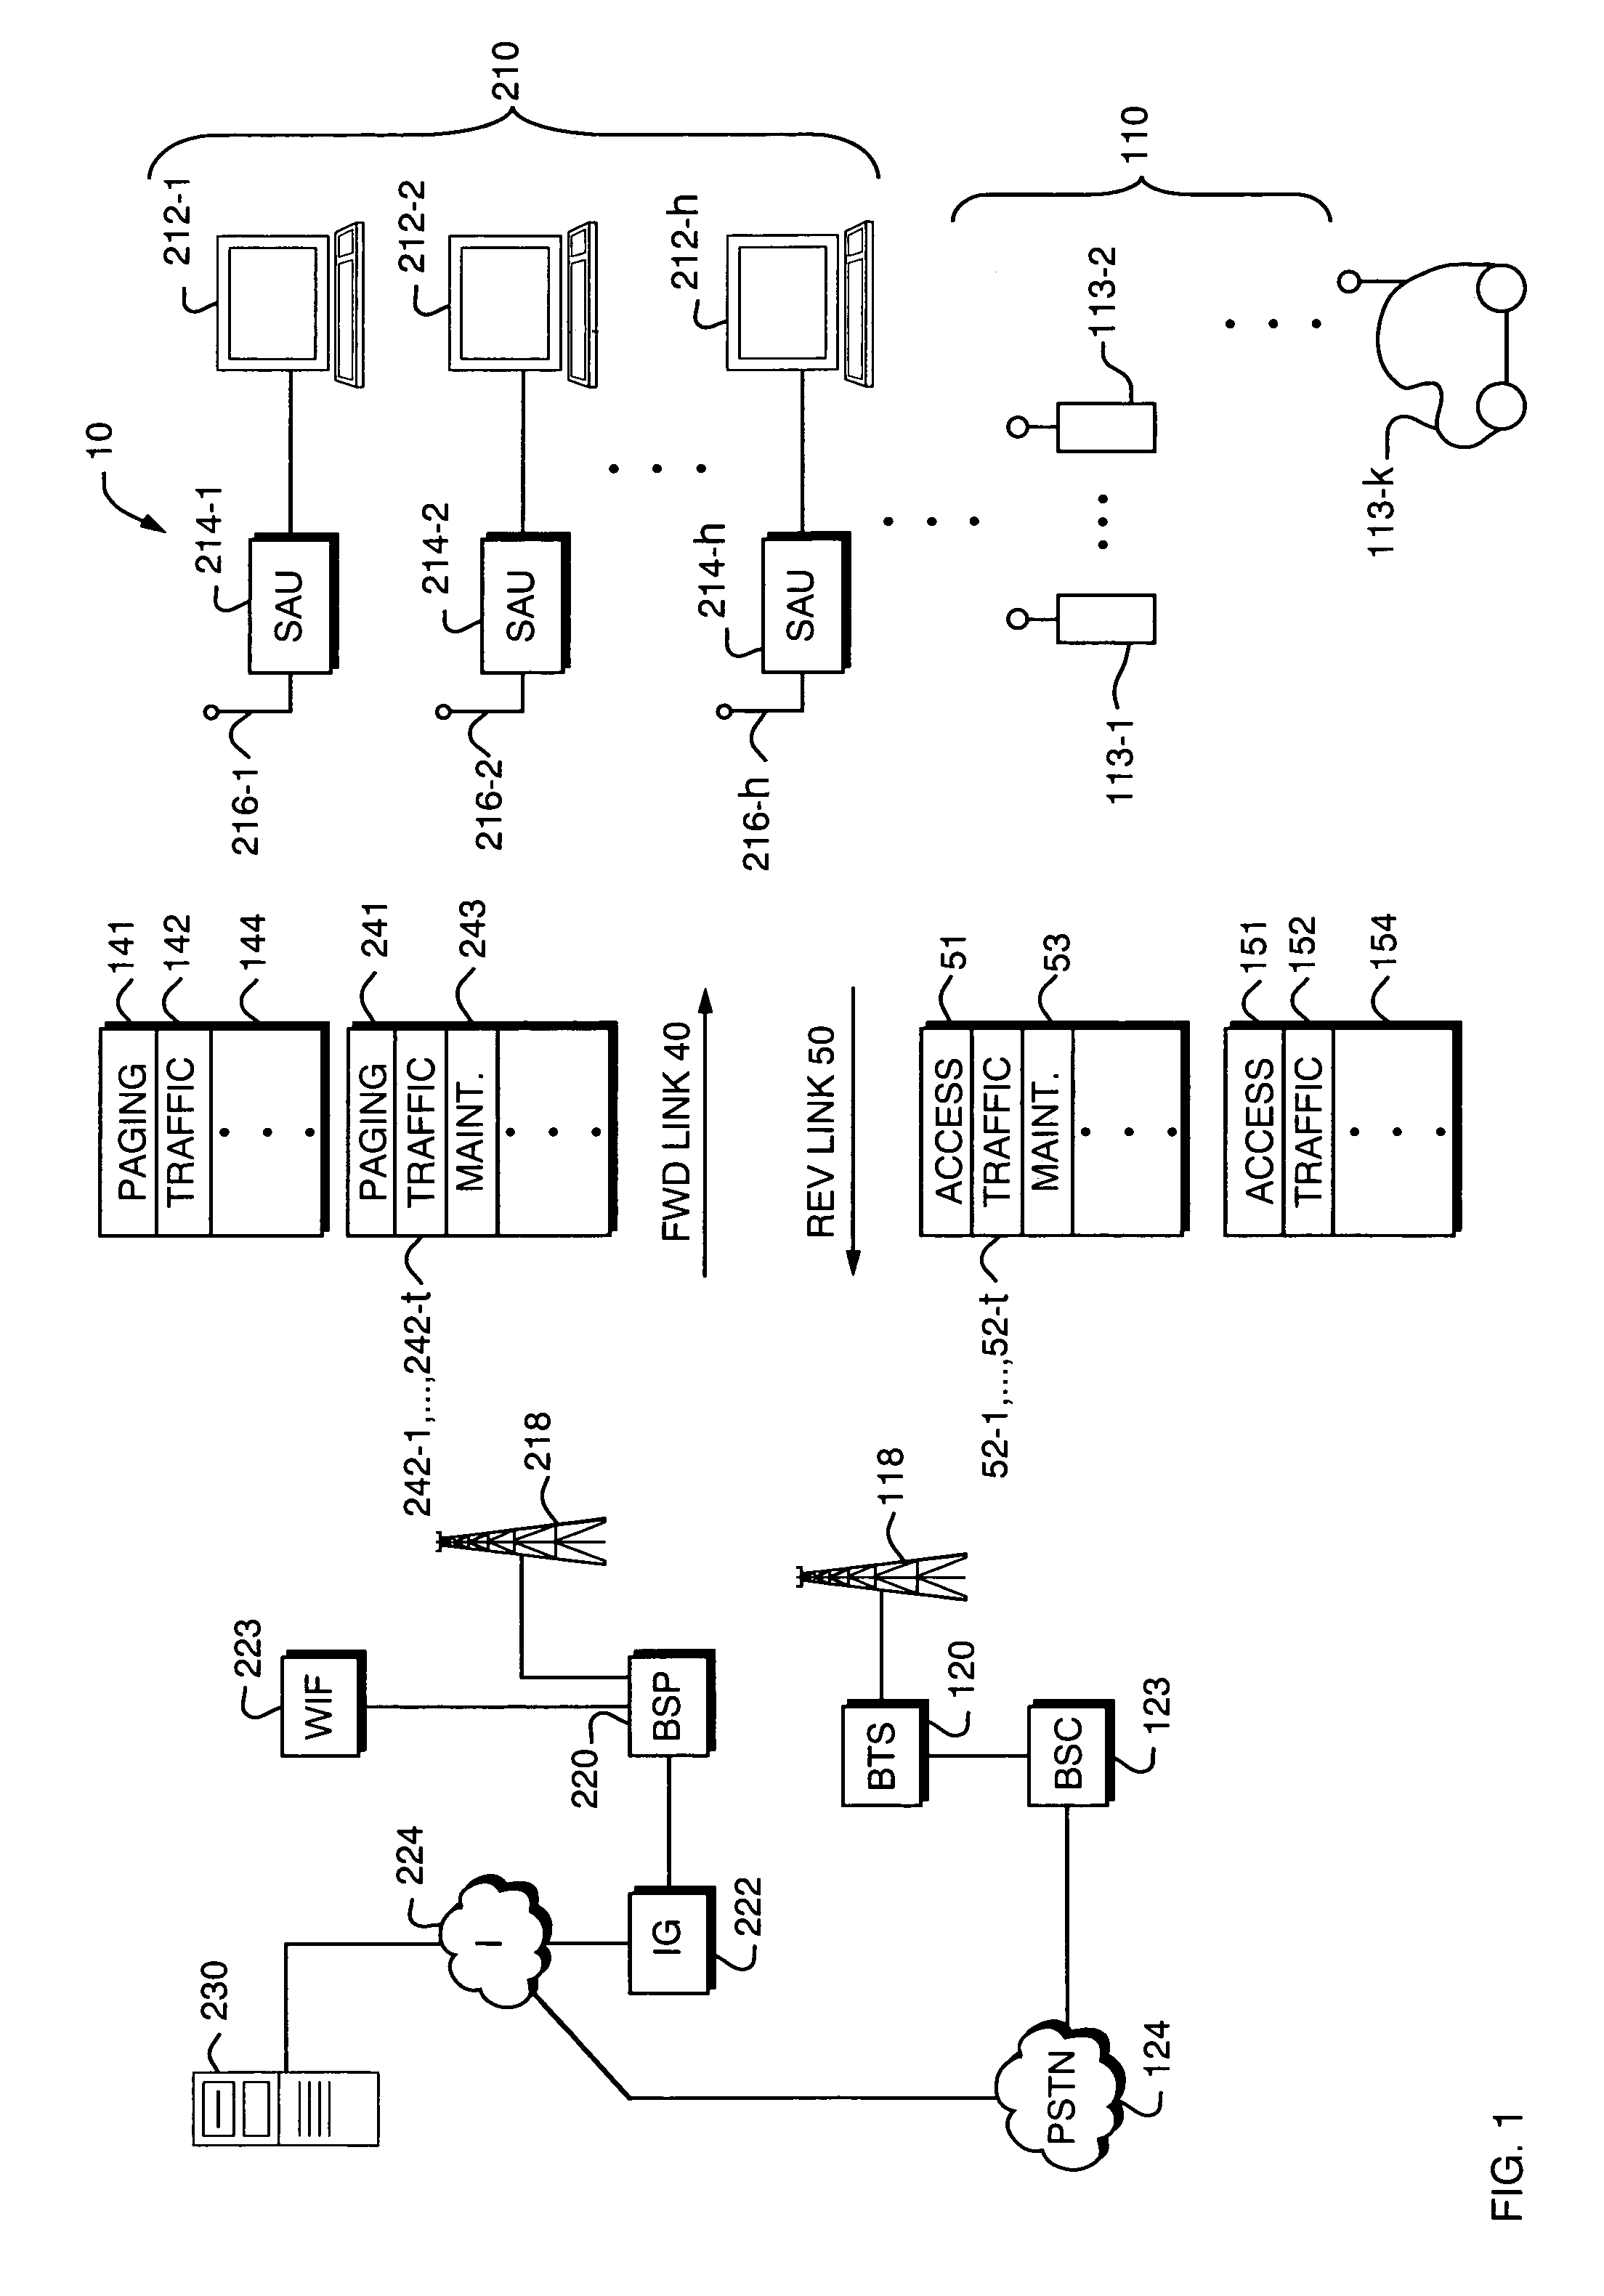 Method for allowing multi-user orthogonal and non-orthogonal interoperability of code channels